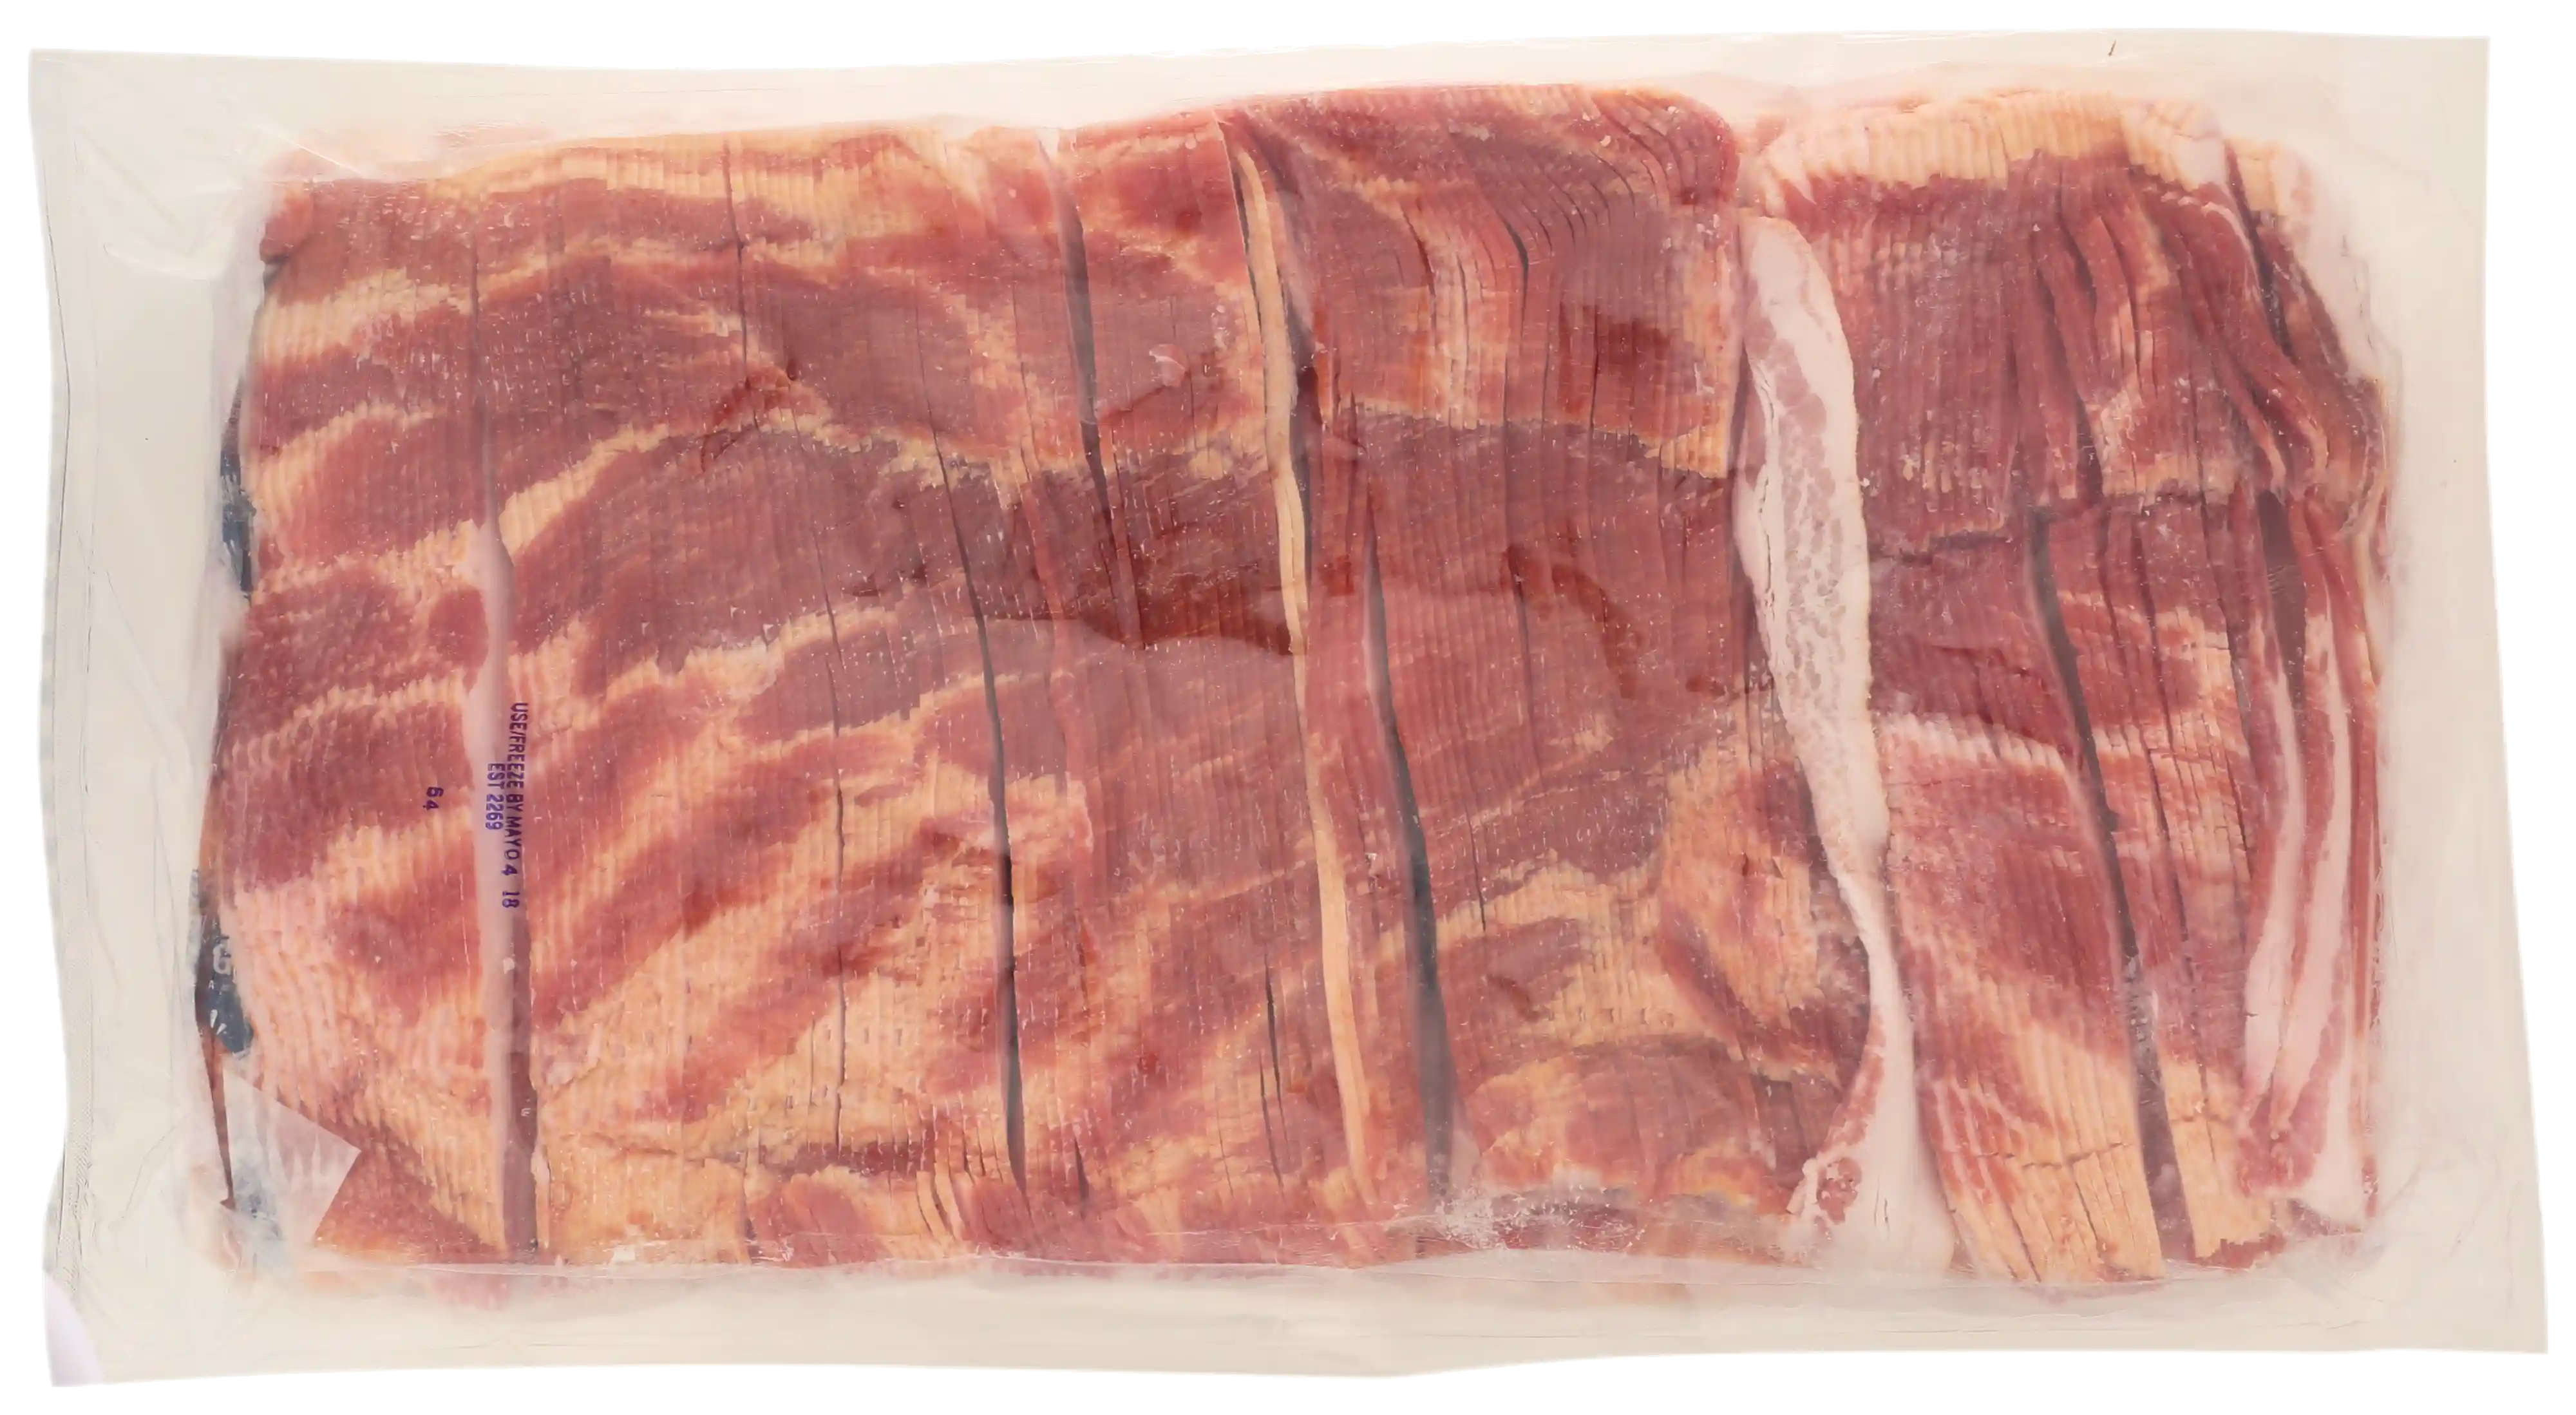 Wright® Brand Naturally Hickory Smoked Thin Sliced Bacon, Bulk, 30 Lbs, 18-22 Slices per Pound, Gas Flushed_image_21